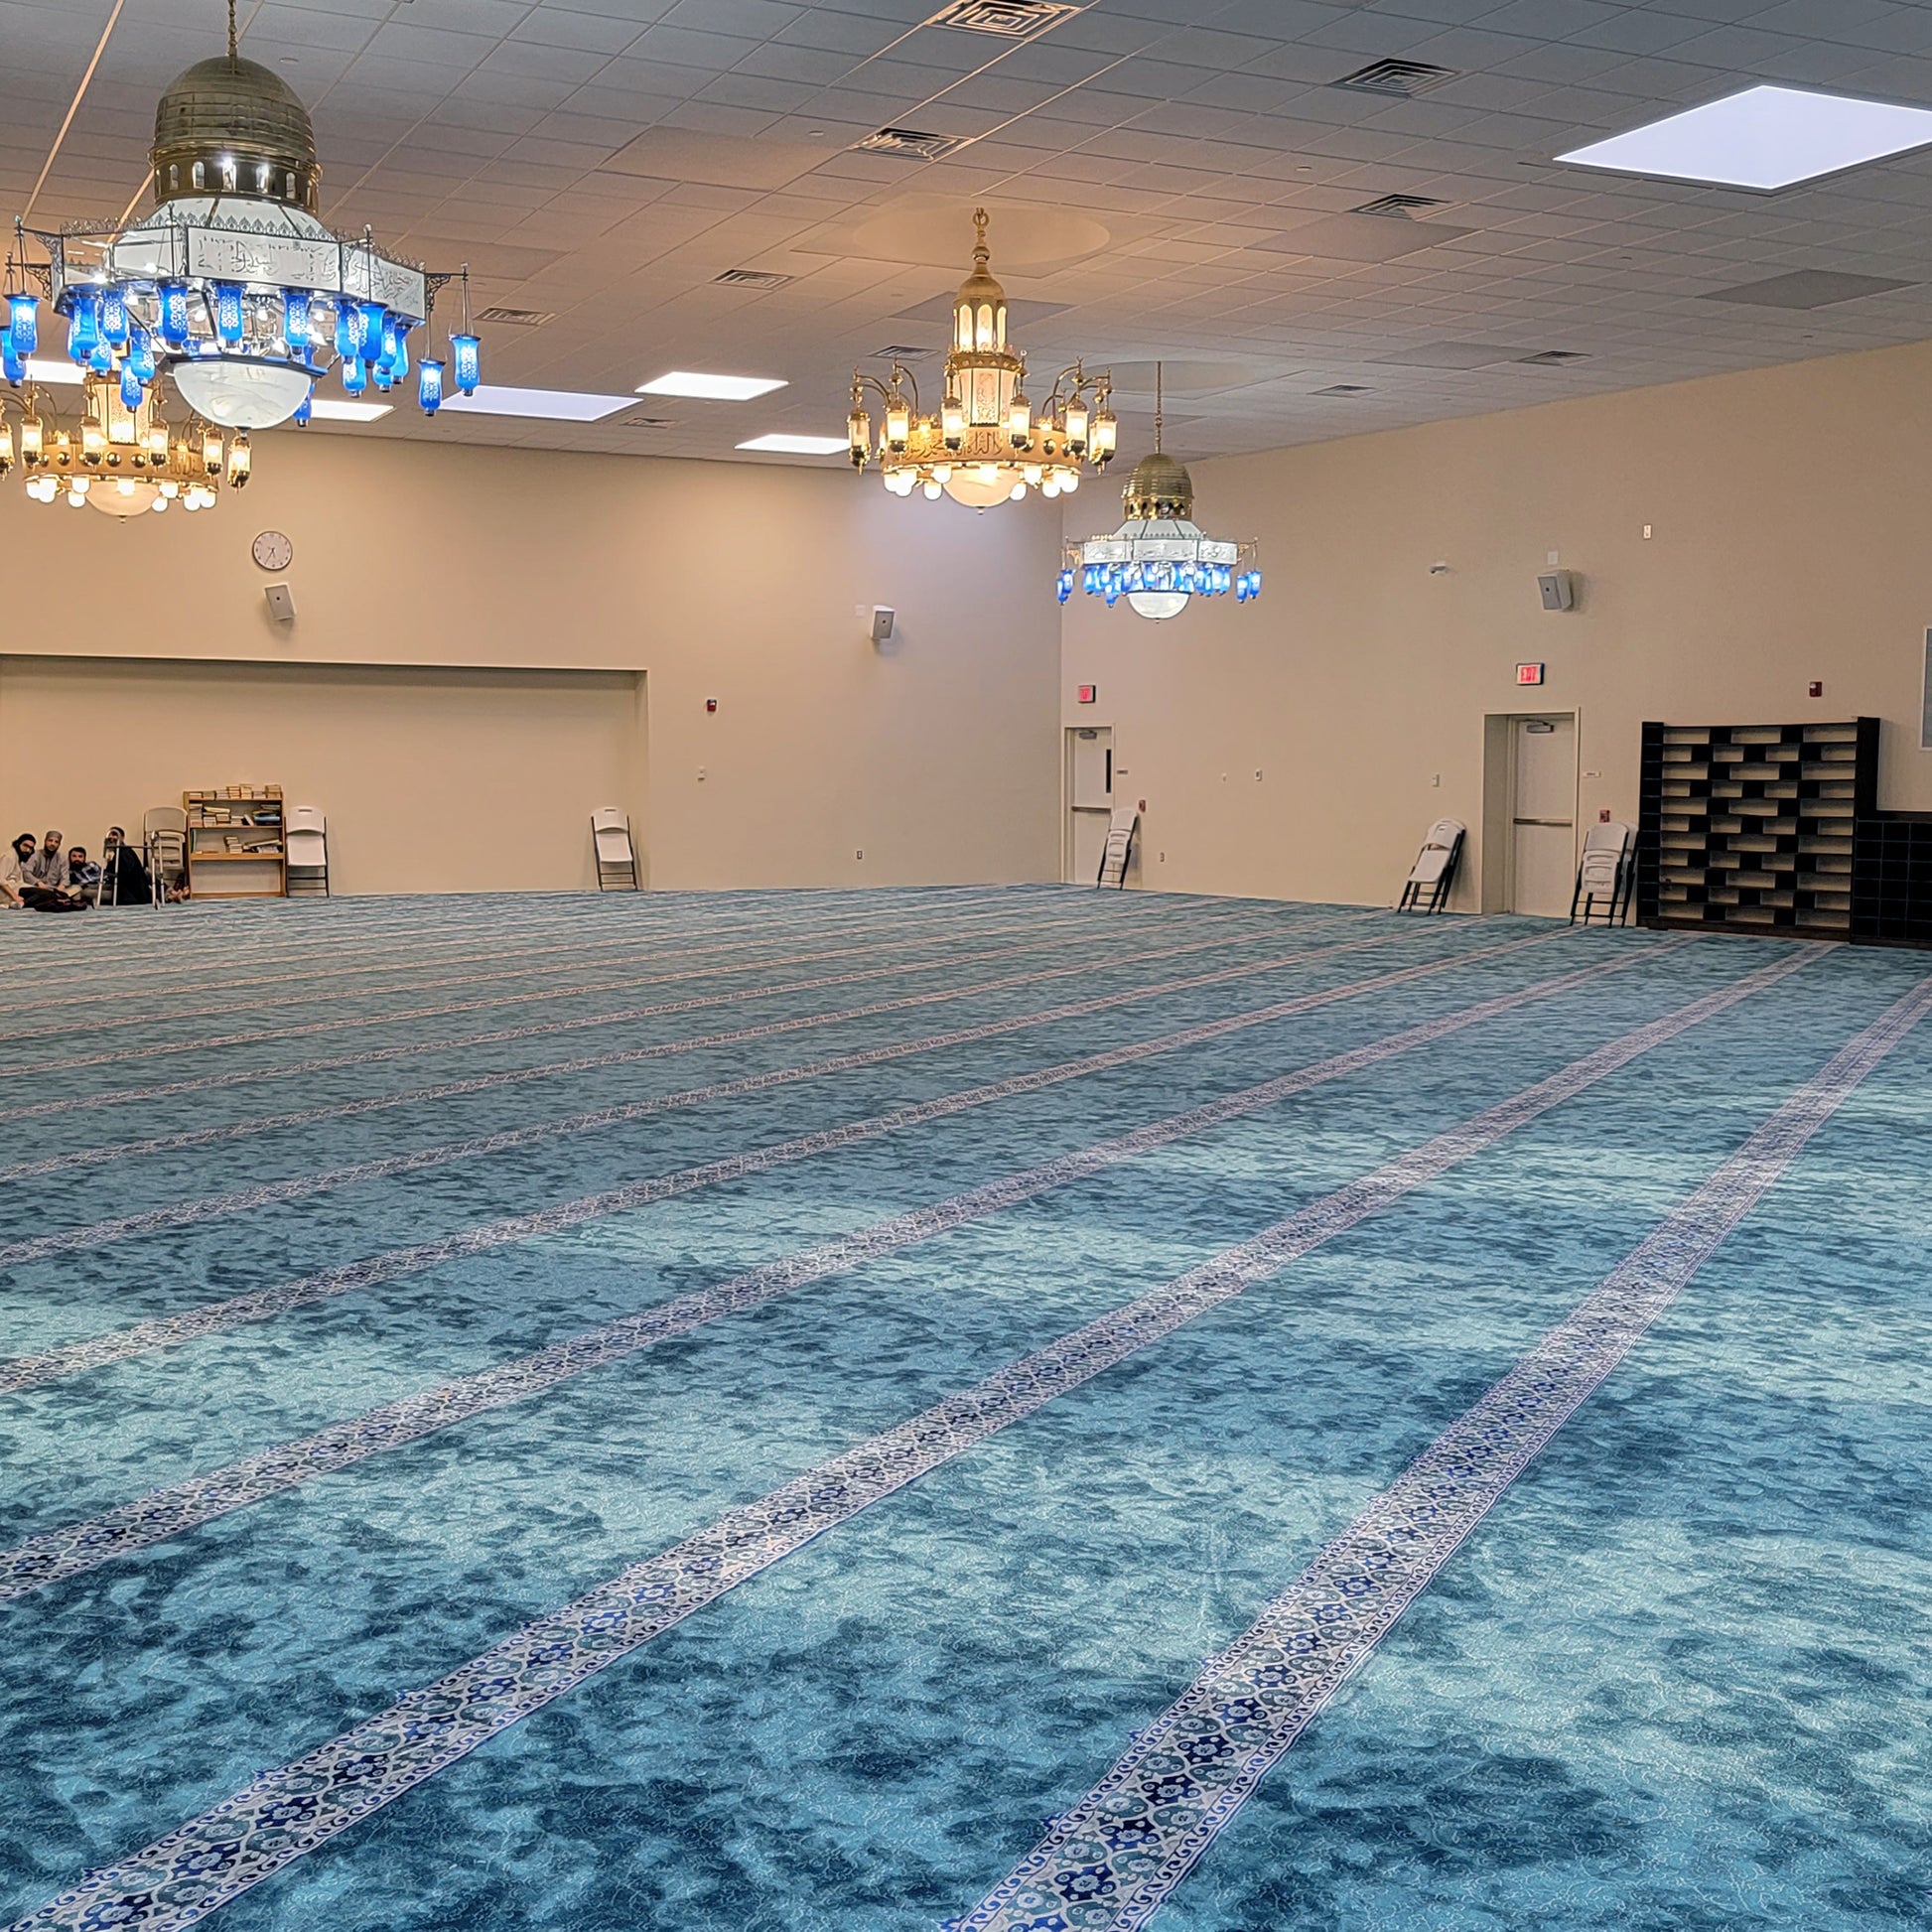 Blue mosque carpeting at New Jersey mosque.